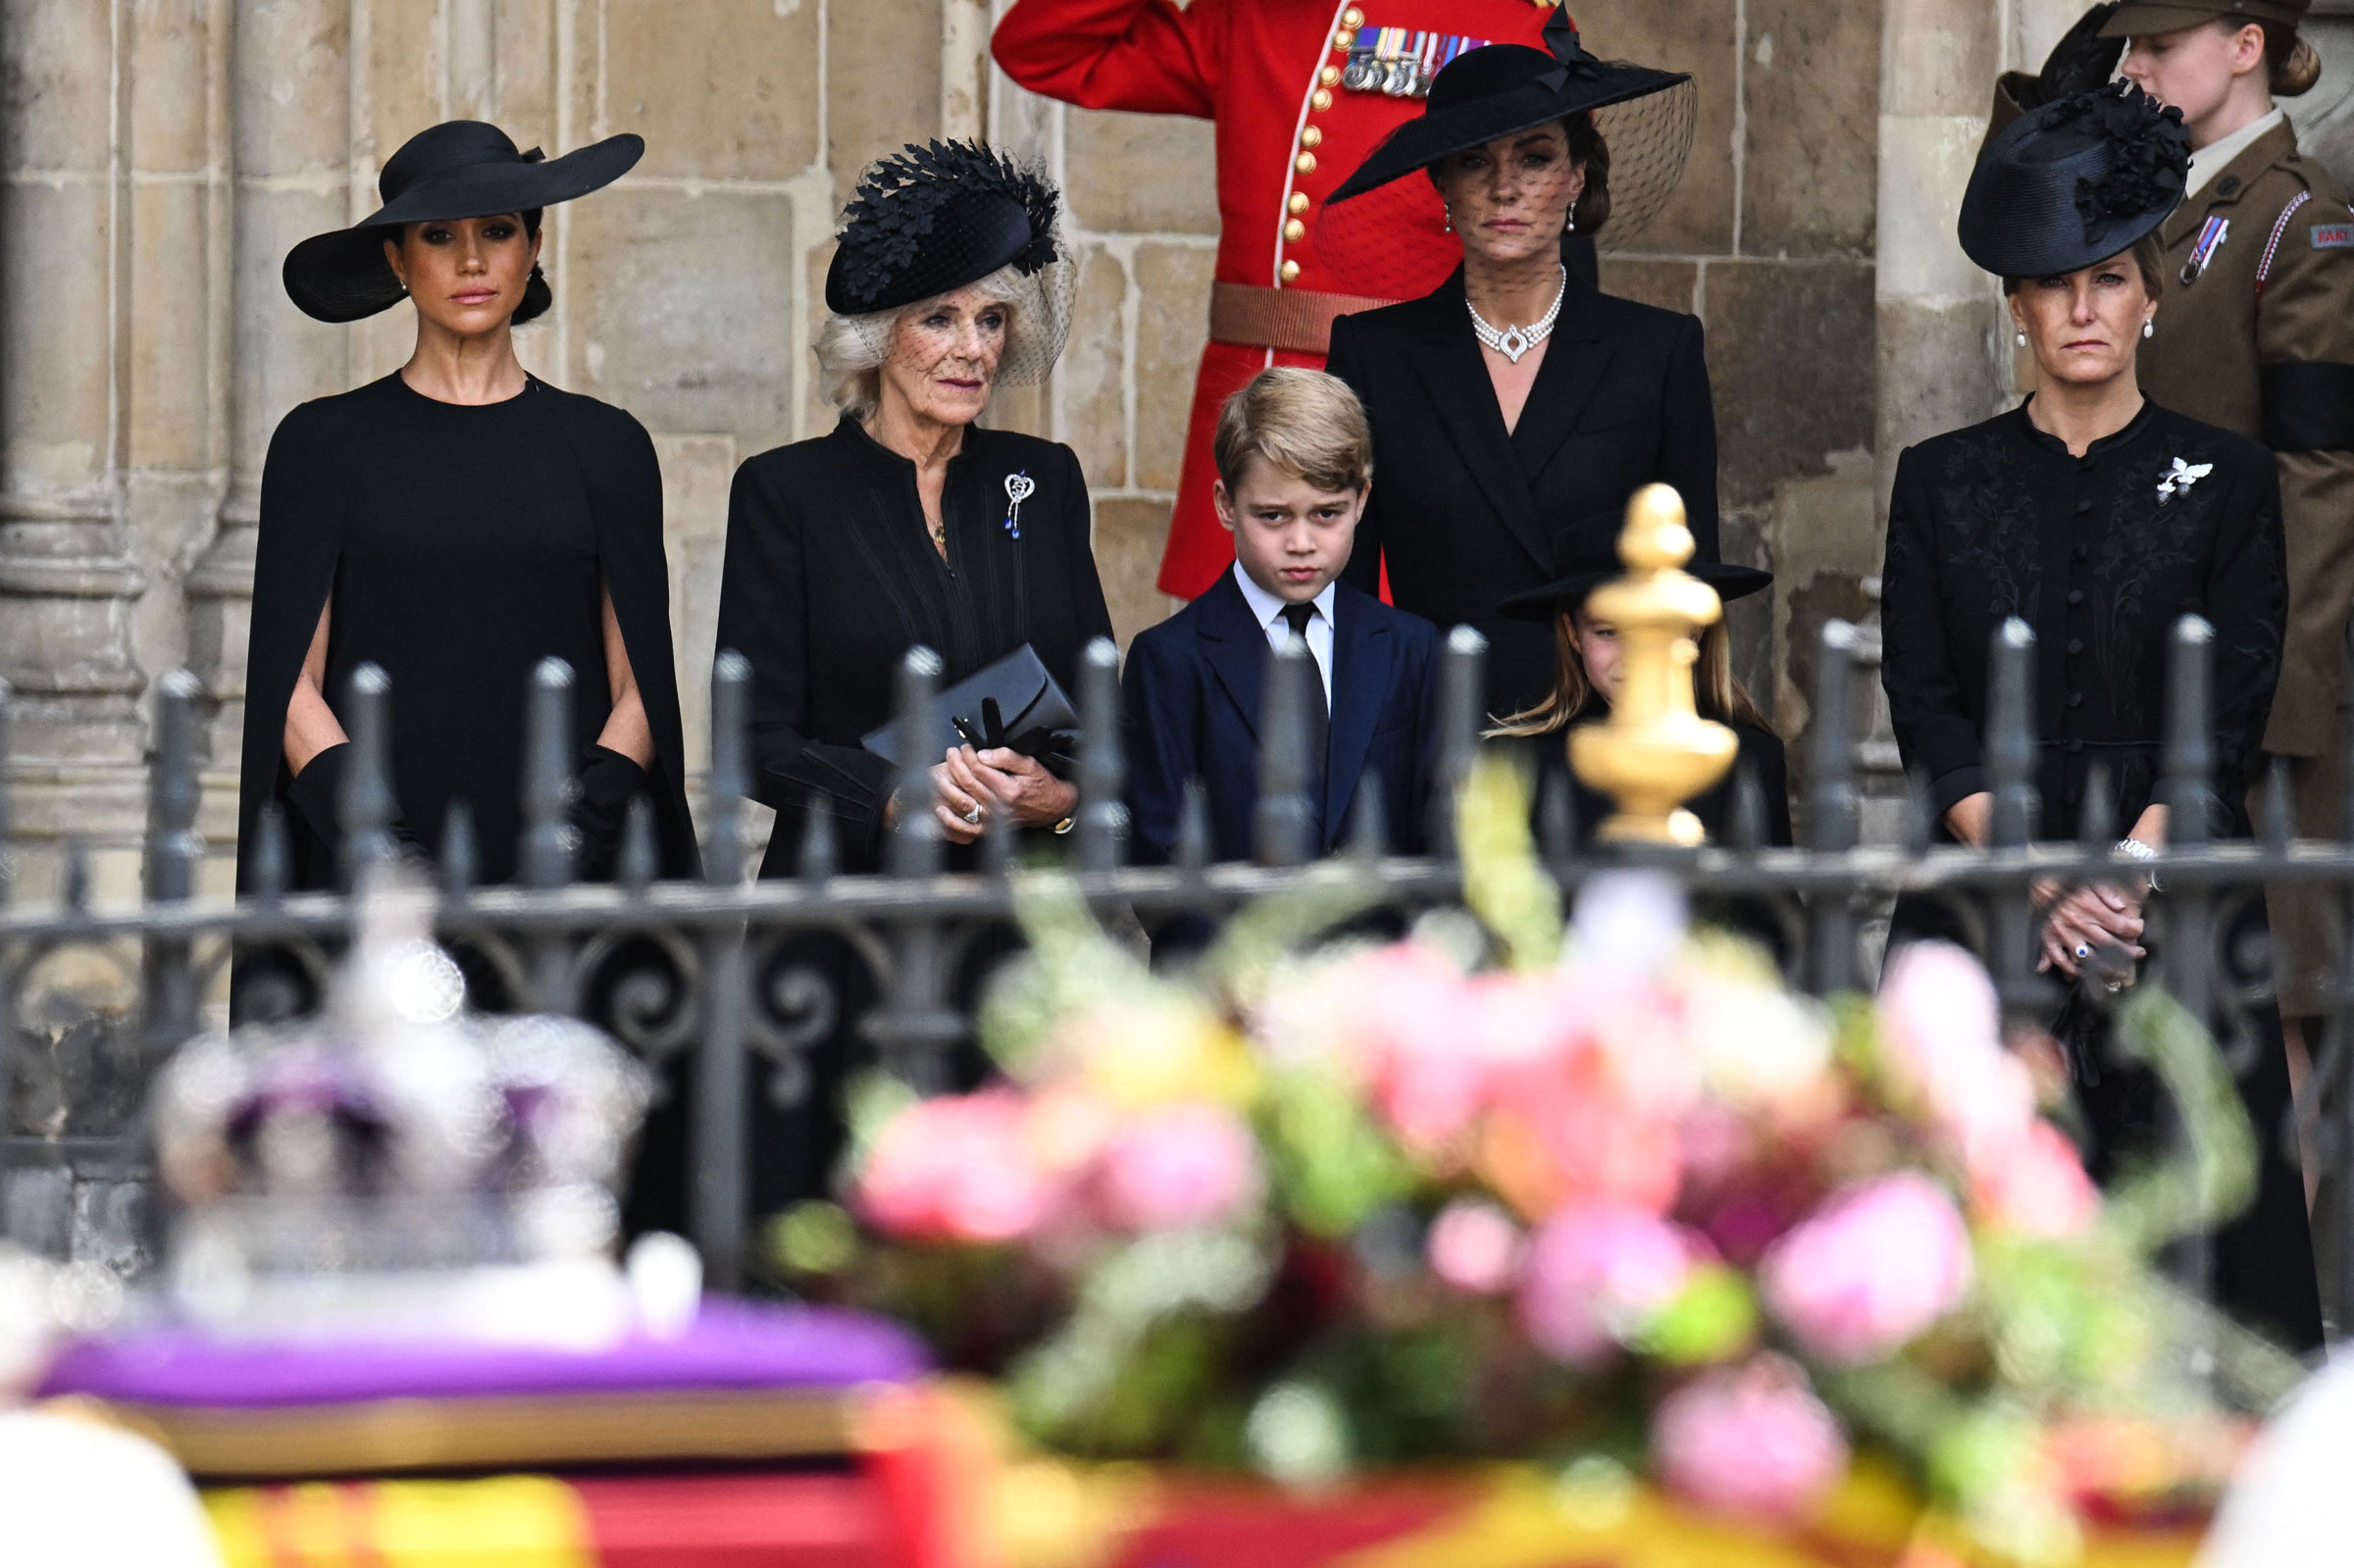 From left: Meghan Markle, Duchess of Sussex; Camilla, Queen Consort; Prince George of Wales; Catherine, Princess of Wales; and Sophie, Countess of Wessex look on Queen Elizabeth II's coffin leaves Westminster Abbey. (Oli Scarff—Pool/AFP/Getty Images)